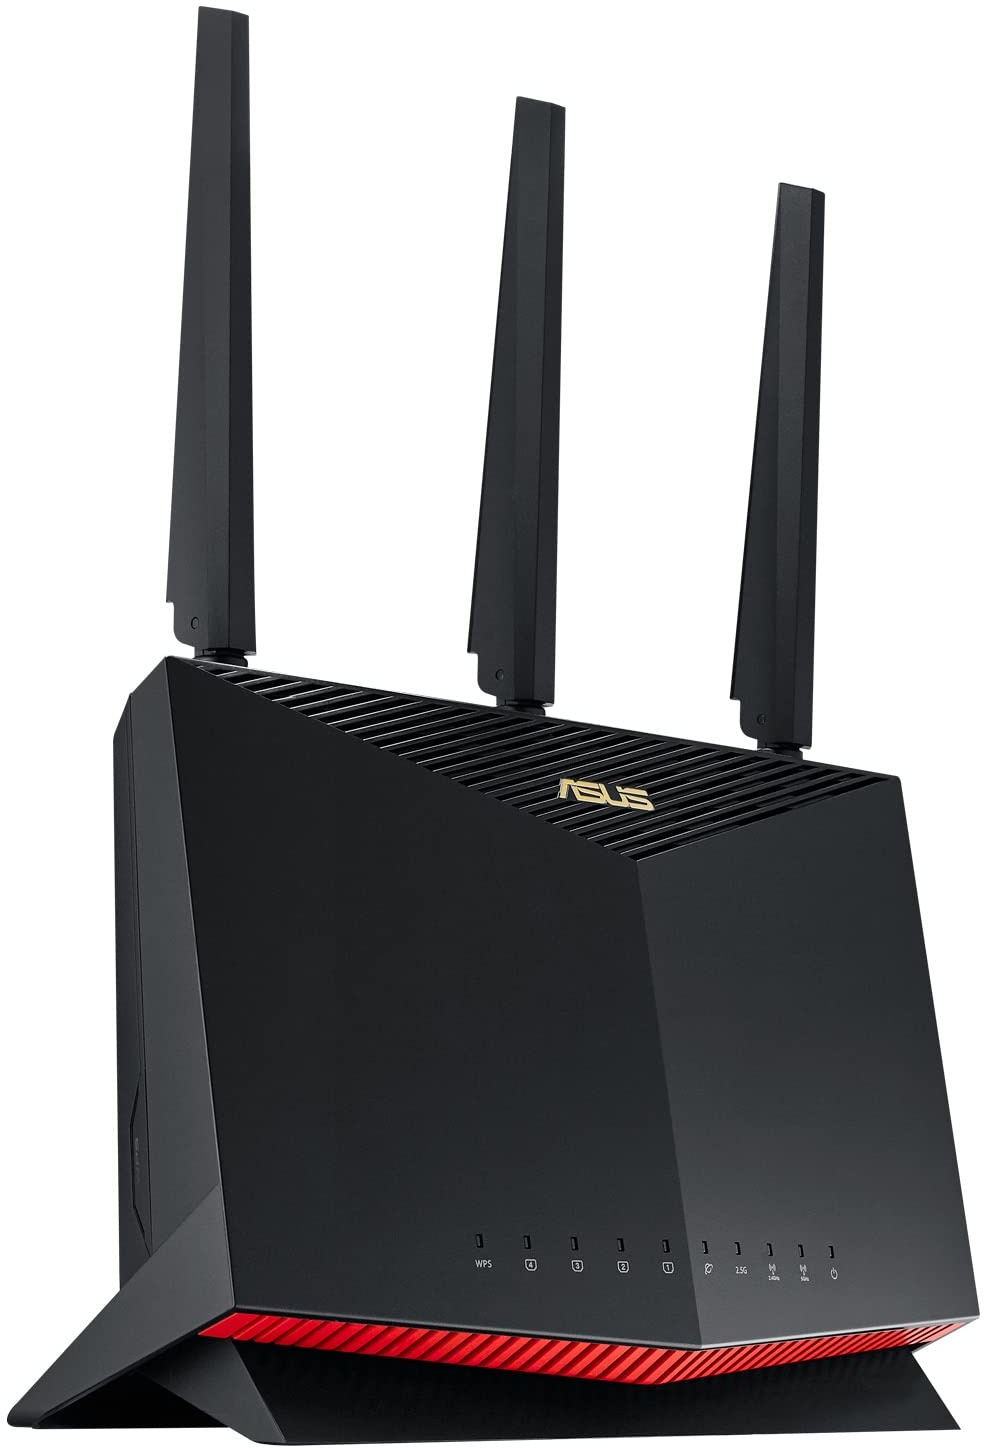 ASUS RT-AX86U Pro AX5700 AiMesh Dual Band WiFi 6 Gaming kombinierbarer Router (Tethering als 4G und 5G Router-Ersatz, PS5-kompatibel, Mobile Game Mode, AiProtection Pro, 2.5G Port, Gaming Port)